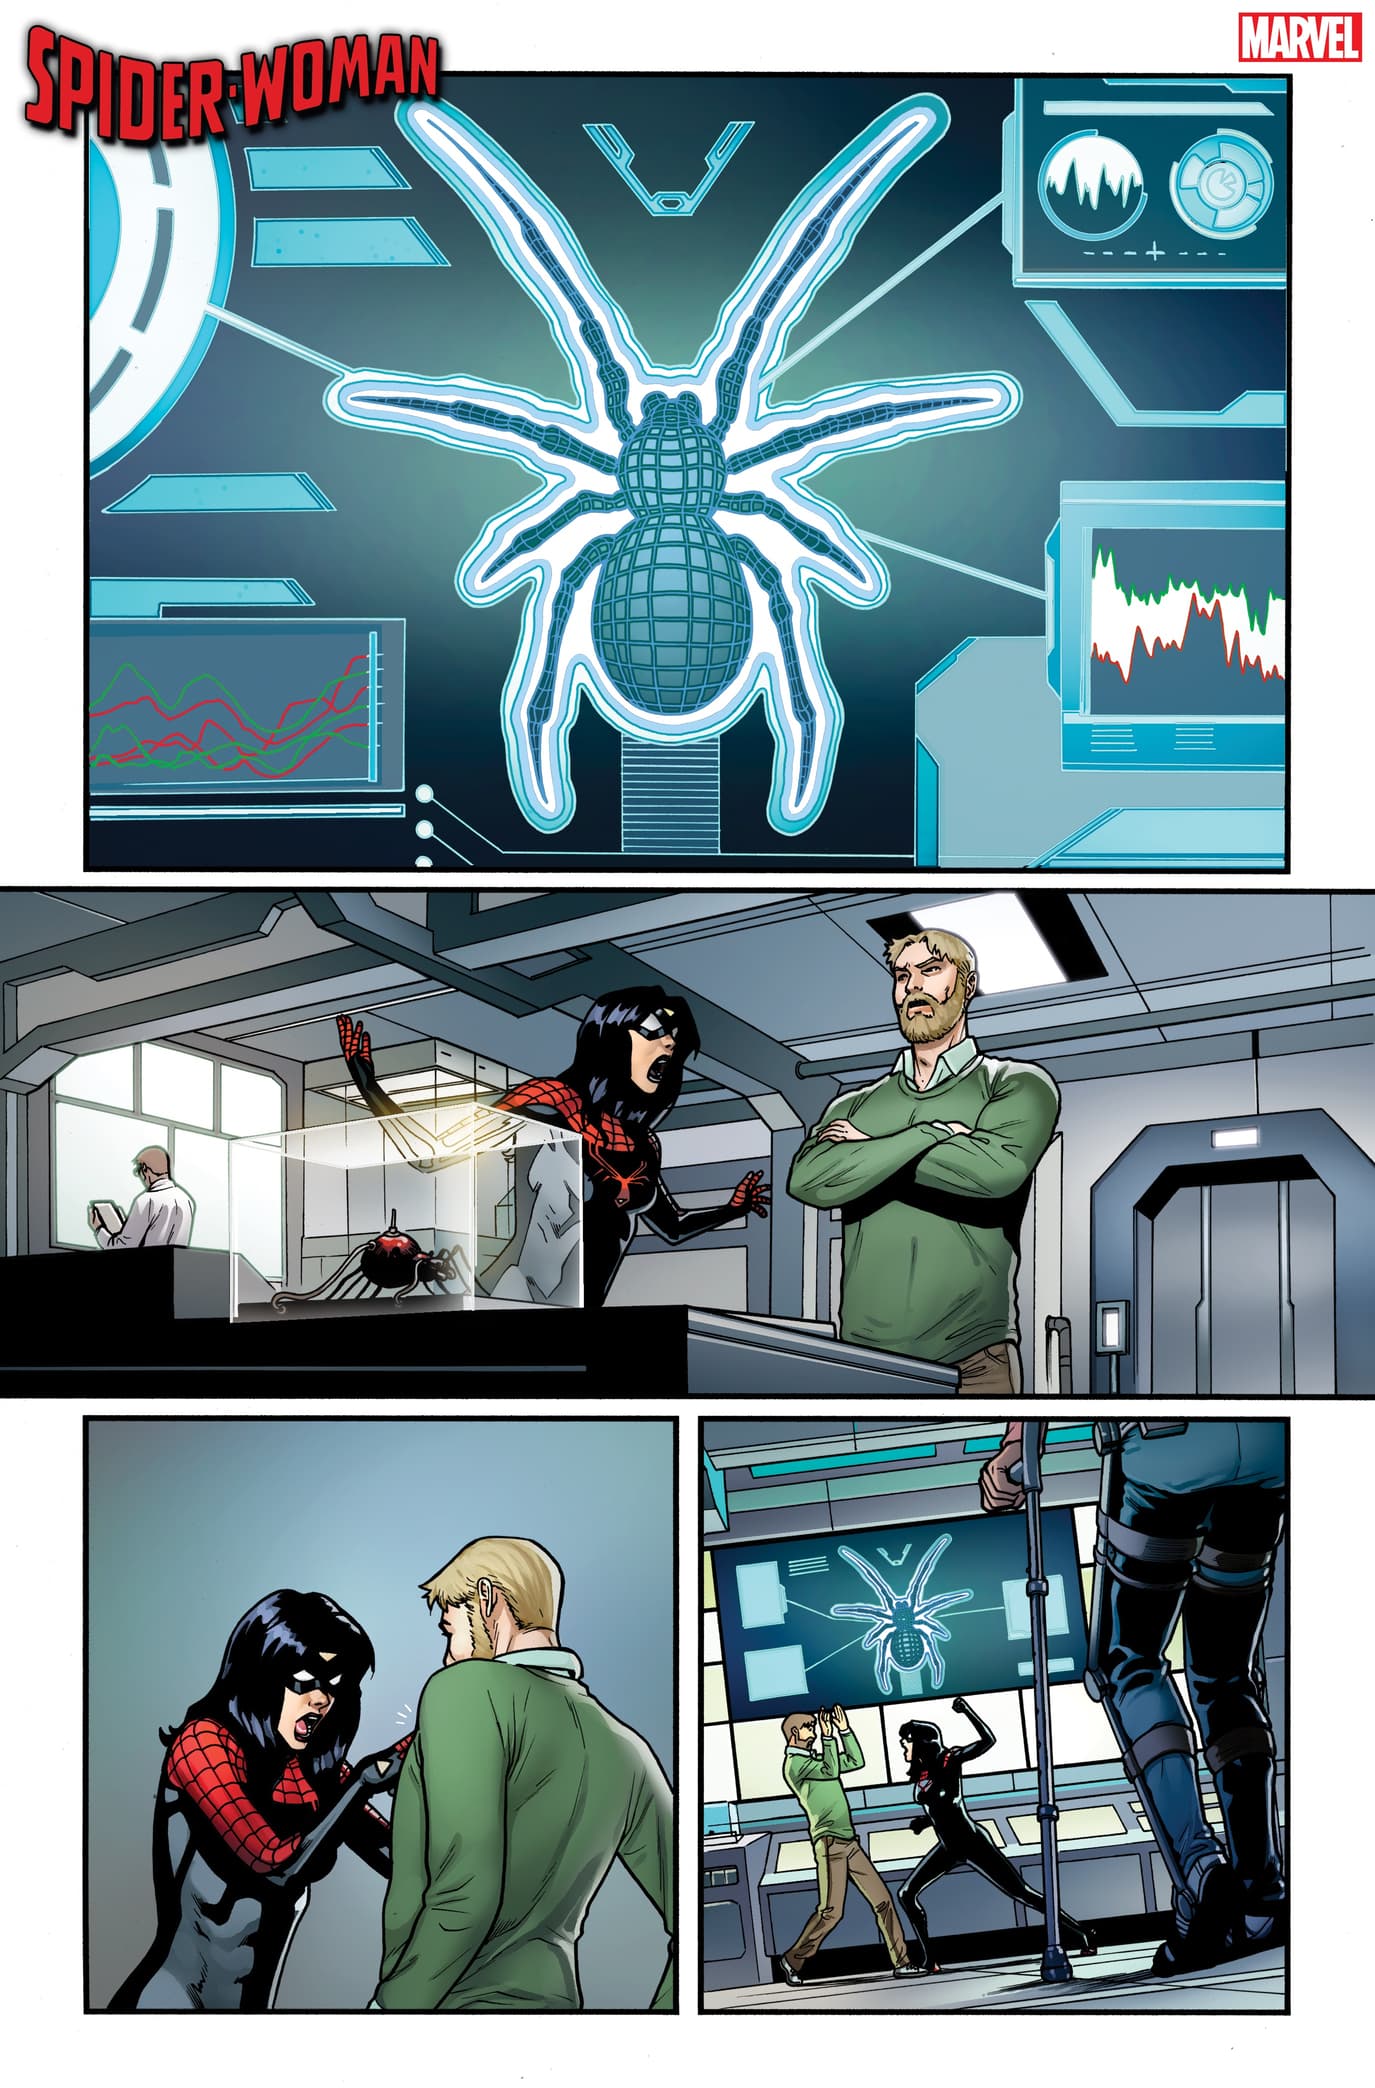 SPIDER-WOMAN #3 preview interiors by Pere Pérez with colors by Frank D'Armata